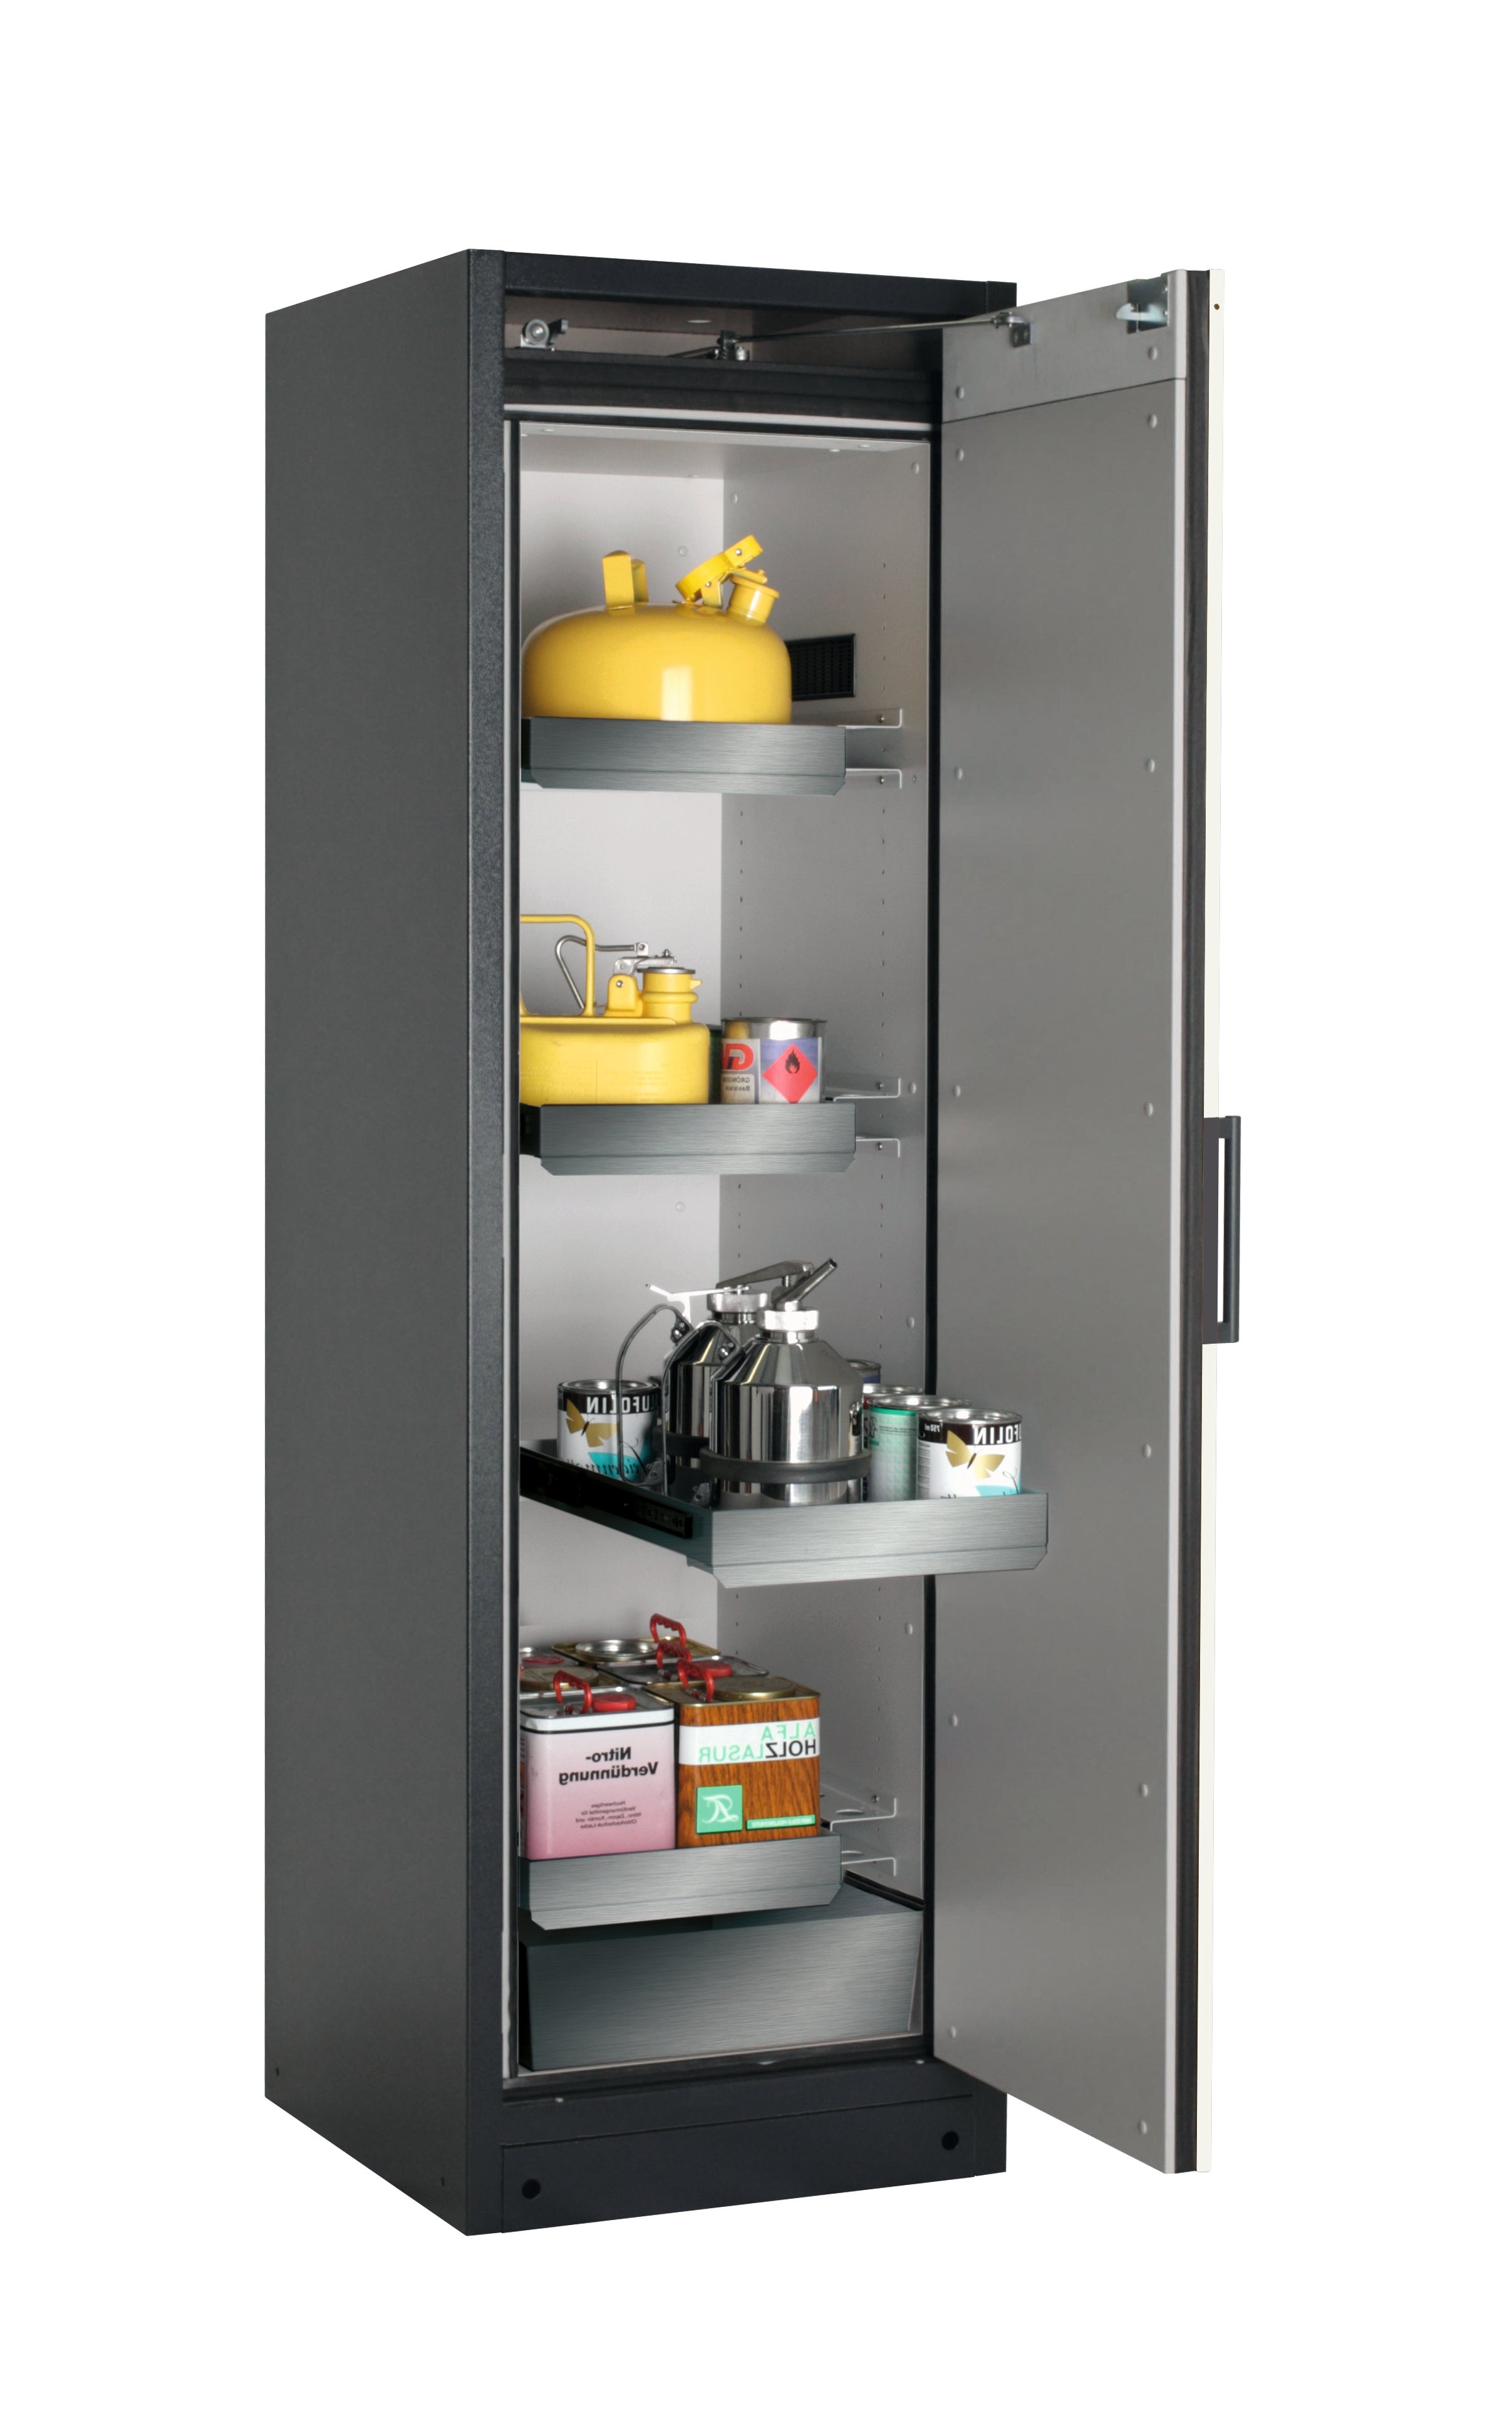 Type 90 safety storage cabinet Q-CLASSIC-90 model Q90.195.060.R in asecos silver with 3x drawer (standard) (stainless steel 1.4301),